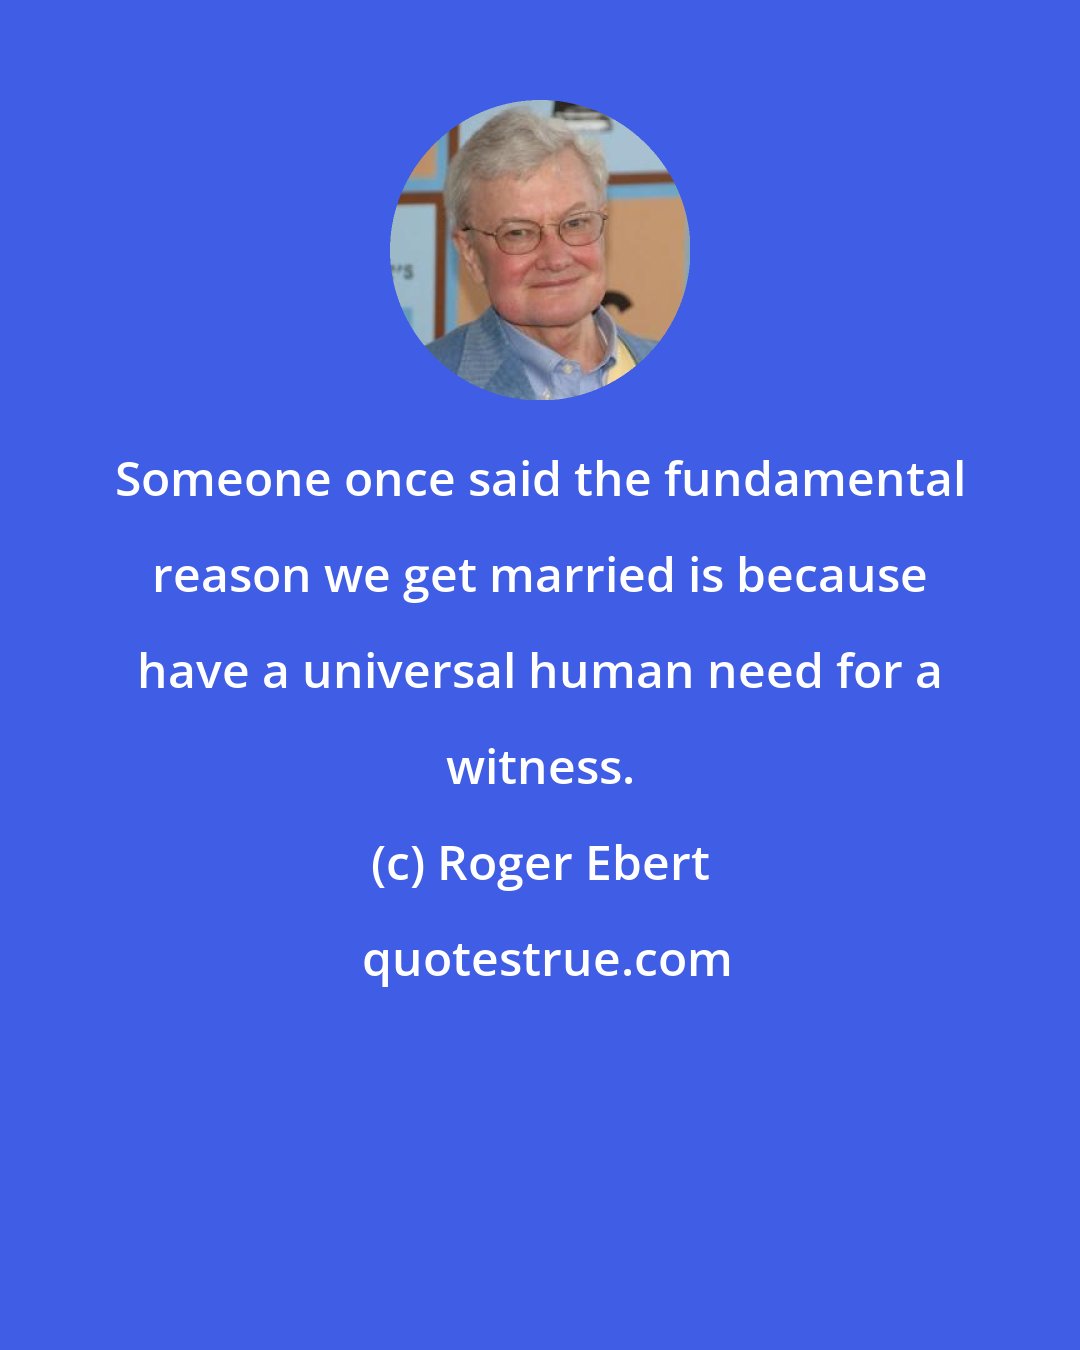 Roger Ebert: Someone once said the fundamental reason we get married is because have a universal human need for a witness.